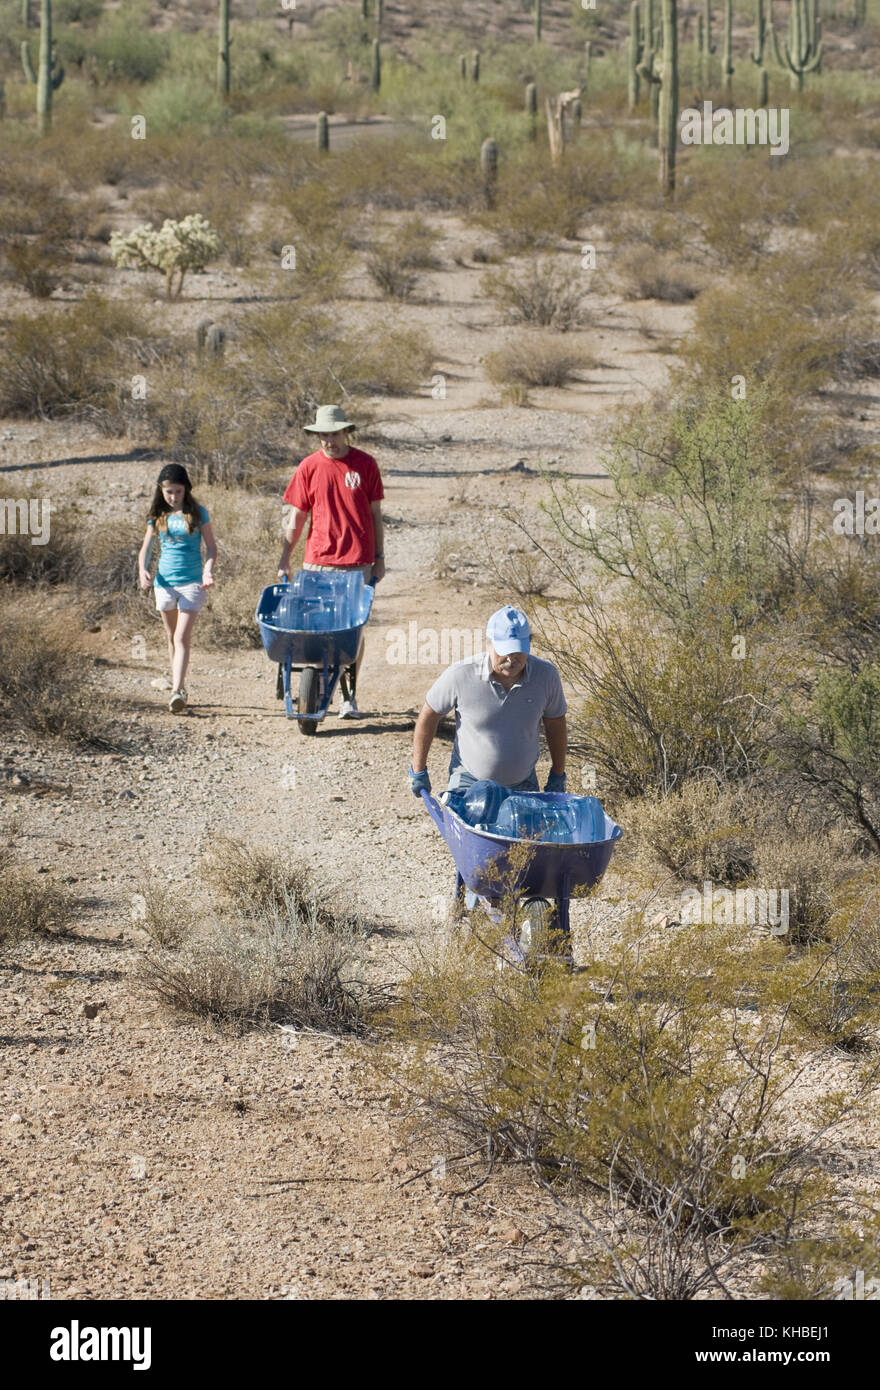 Ajo, Arizona, USA. 16th Oct, 2010. Humane Borders volunteers Lawn Griffiths, (front), Tempe, Ariz., John Asher, Phoenix, and his daughter, Caetlin, 12, restock water at a water station in Organ Pipe National Monument in the Sonoran Desert south of Ajo Arizona. Humane Borders maintains more than 100 water stations along the US/Mexico border in an effort to stem the death toll of migrants who enter the U.S., using the most dangerous and inhospitable routes through the desert. Although the number of people of illegally crossing into the U.S. through Arizona is down, the death toll set a recor Stock Photo